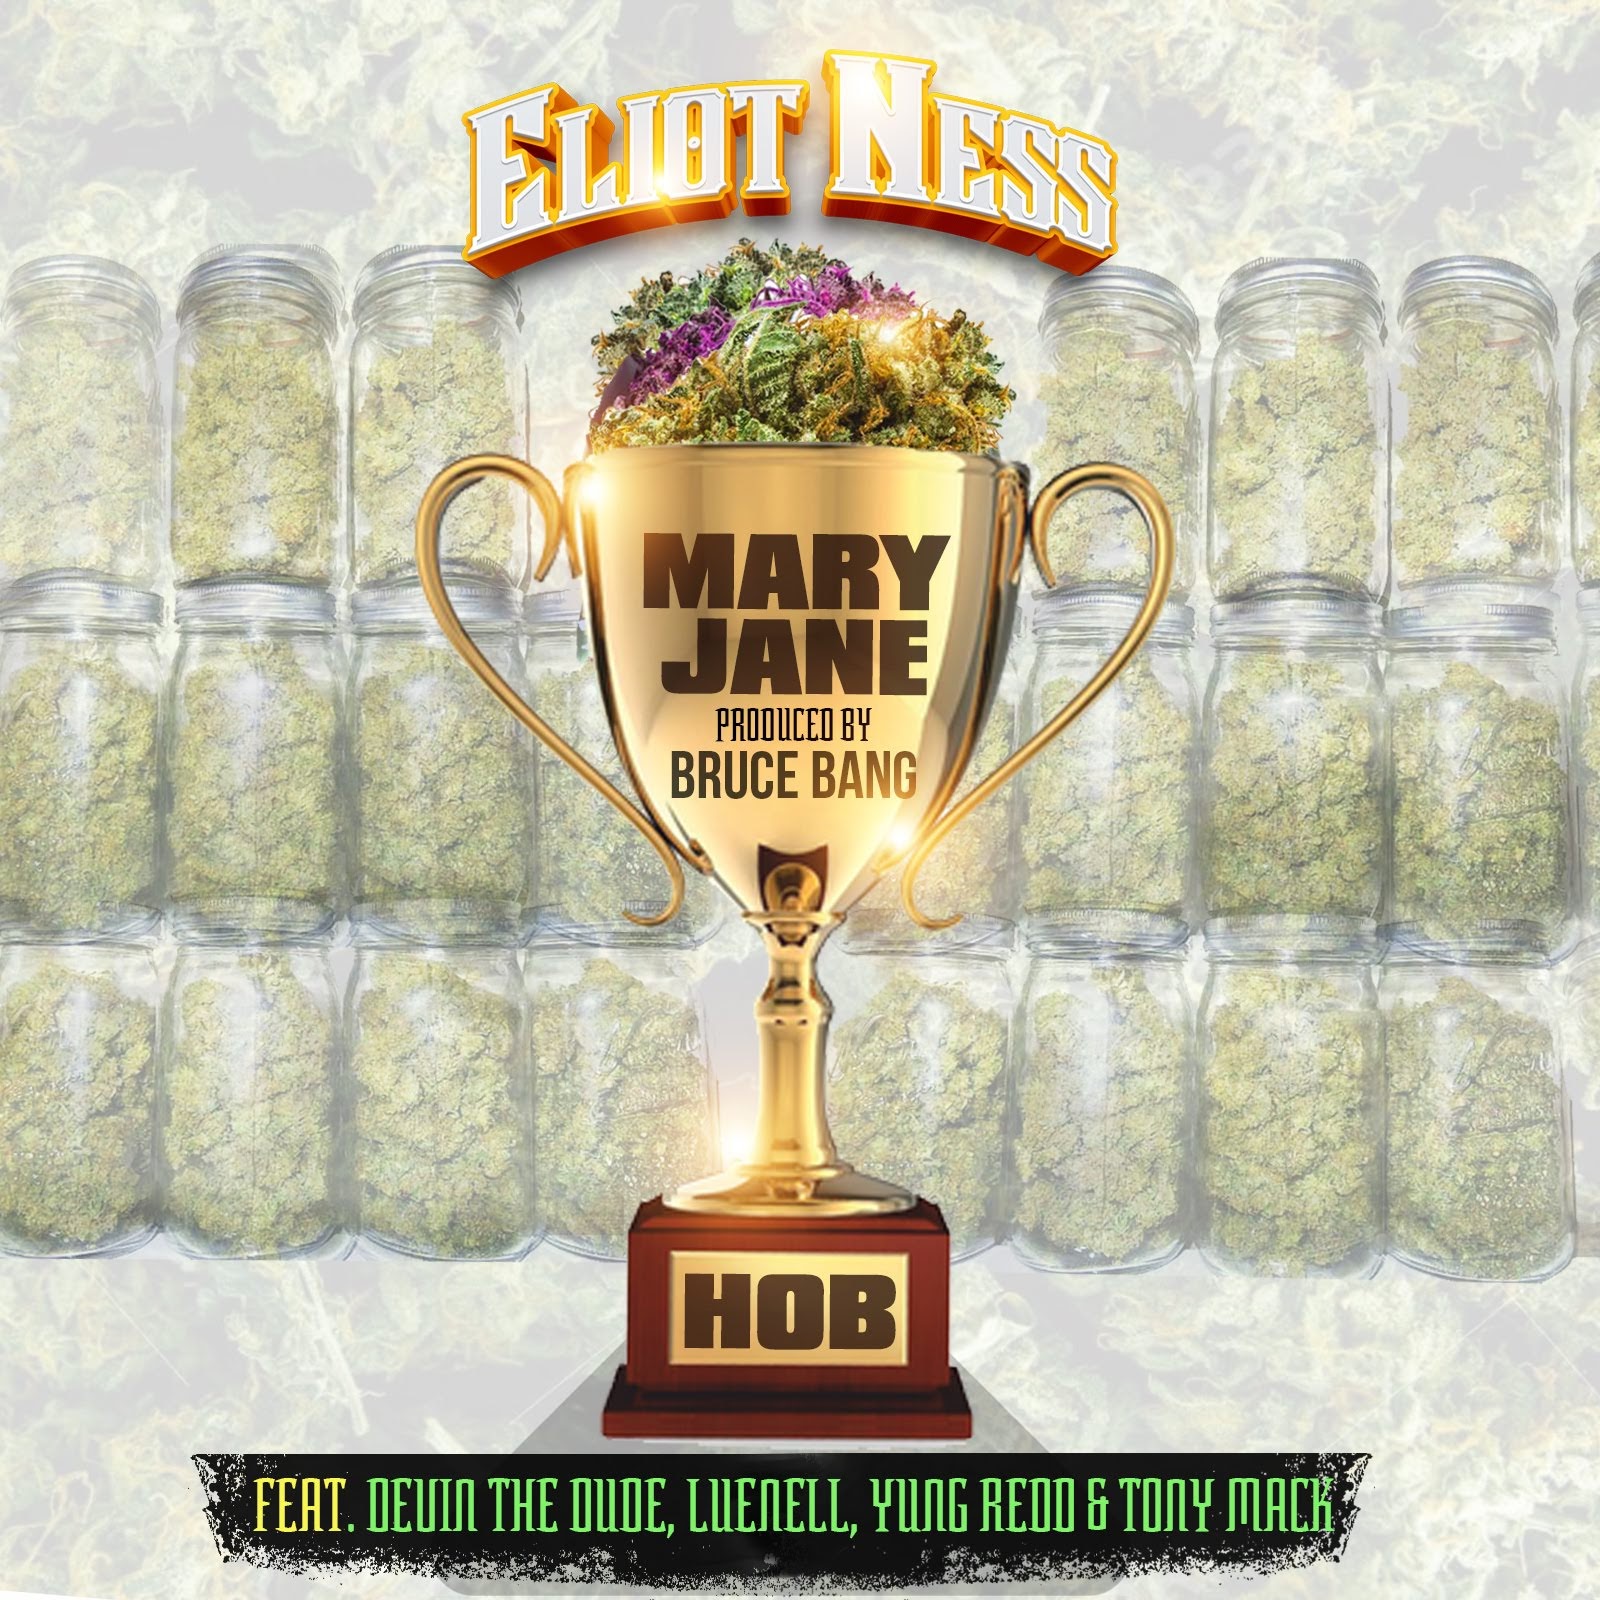 Mary Jane - Eliot Ness Ft Luenell, Devin The Dude, Yung Redd, Tony Mack Produced By Bruce Bang